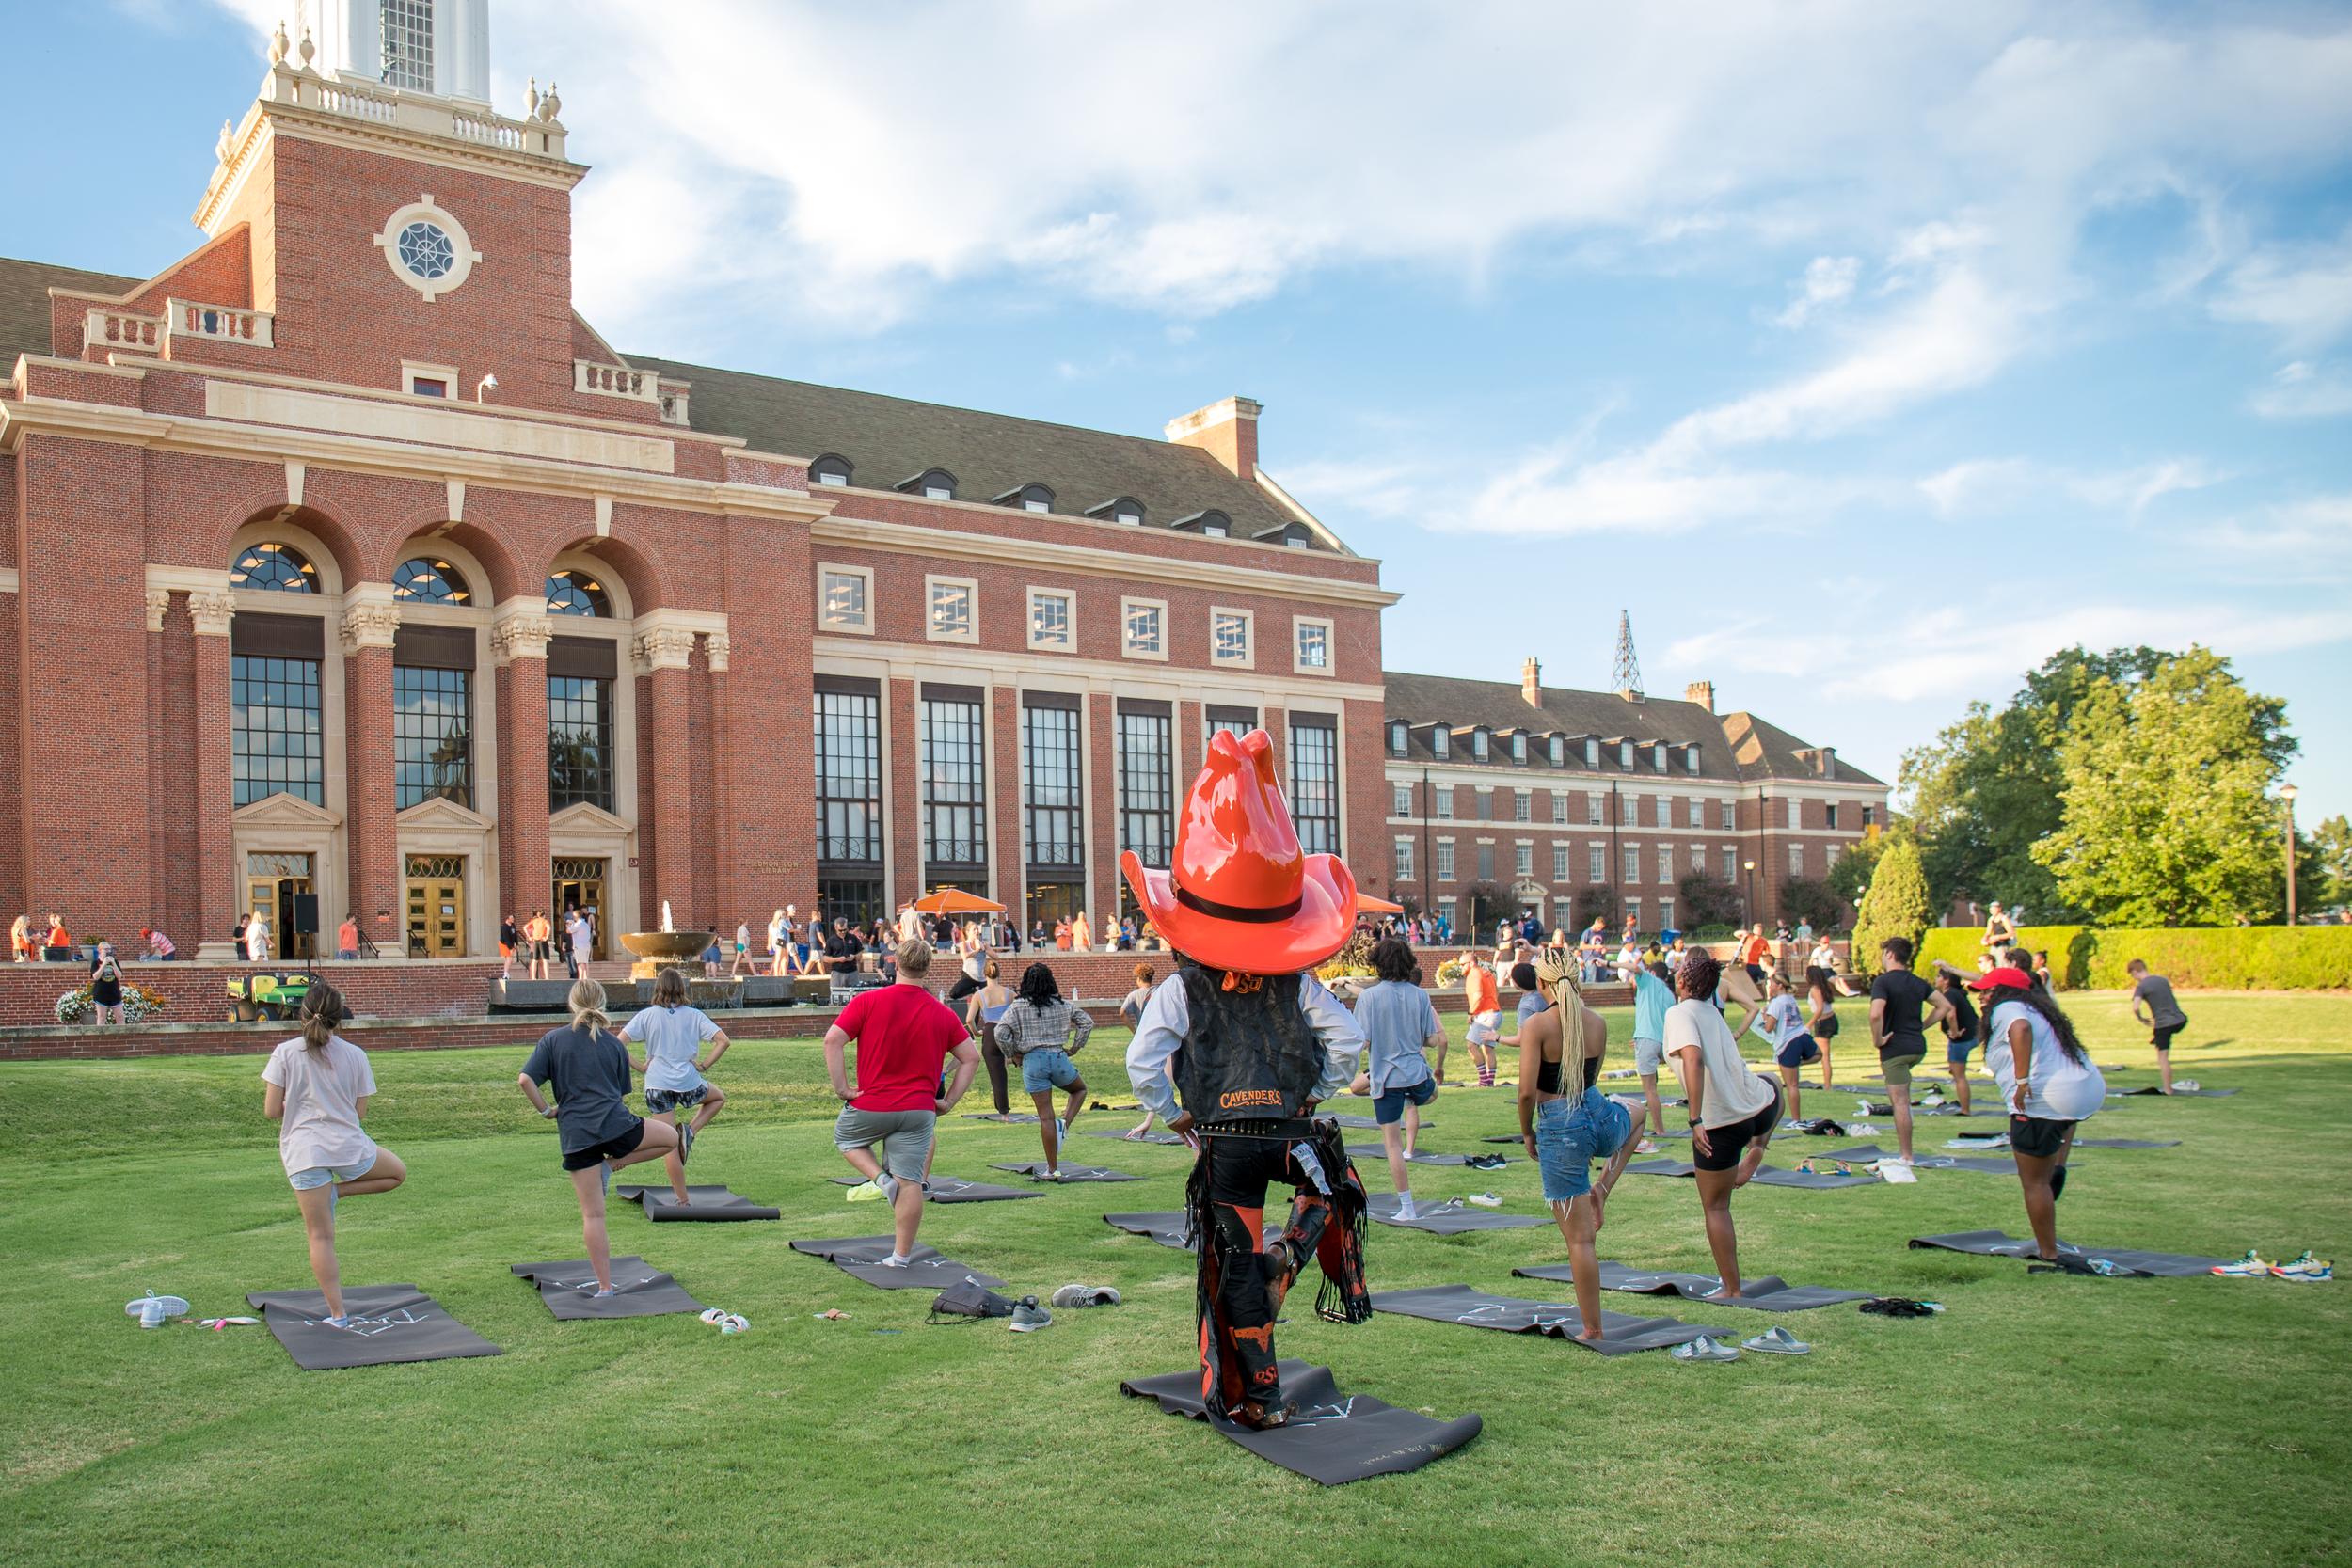 Pete joining yoga on the library lawn to help calm his mind for his upcoming presentation.